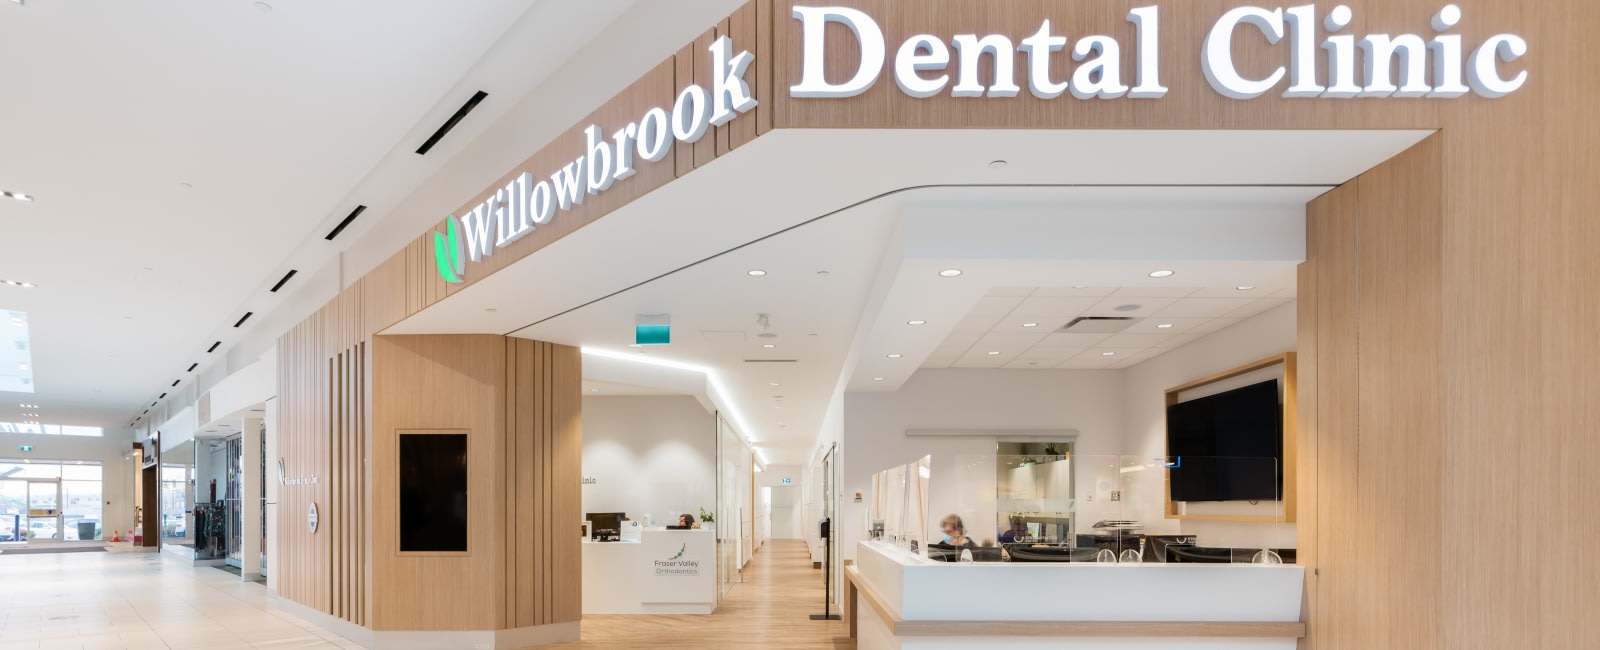 Looking for a Dentist in Langley?